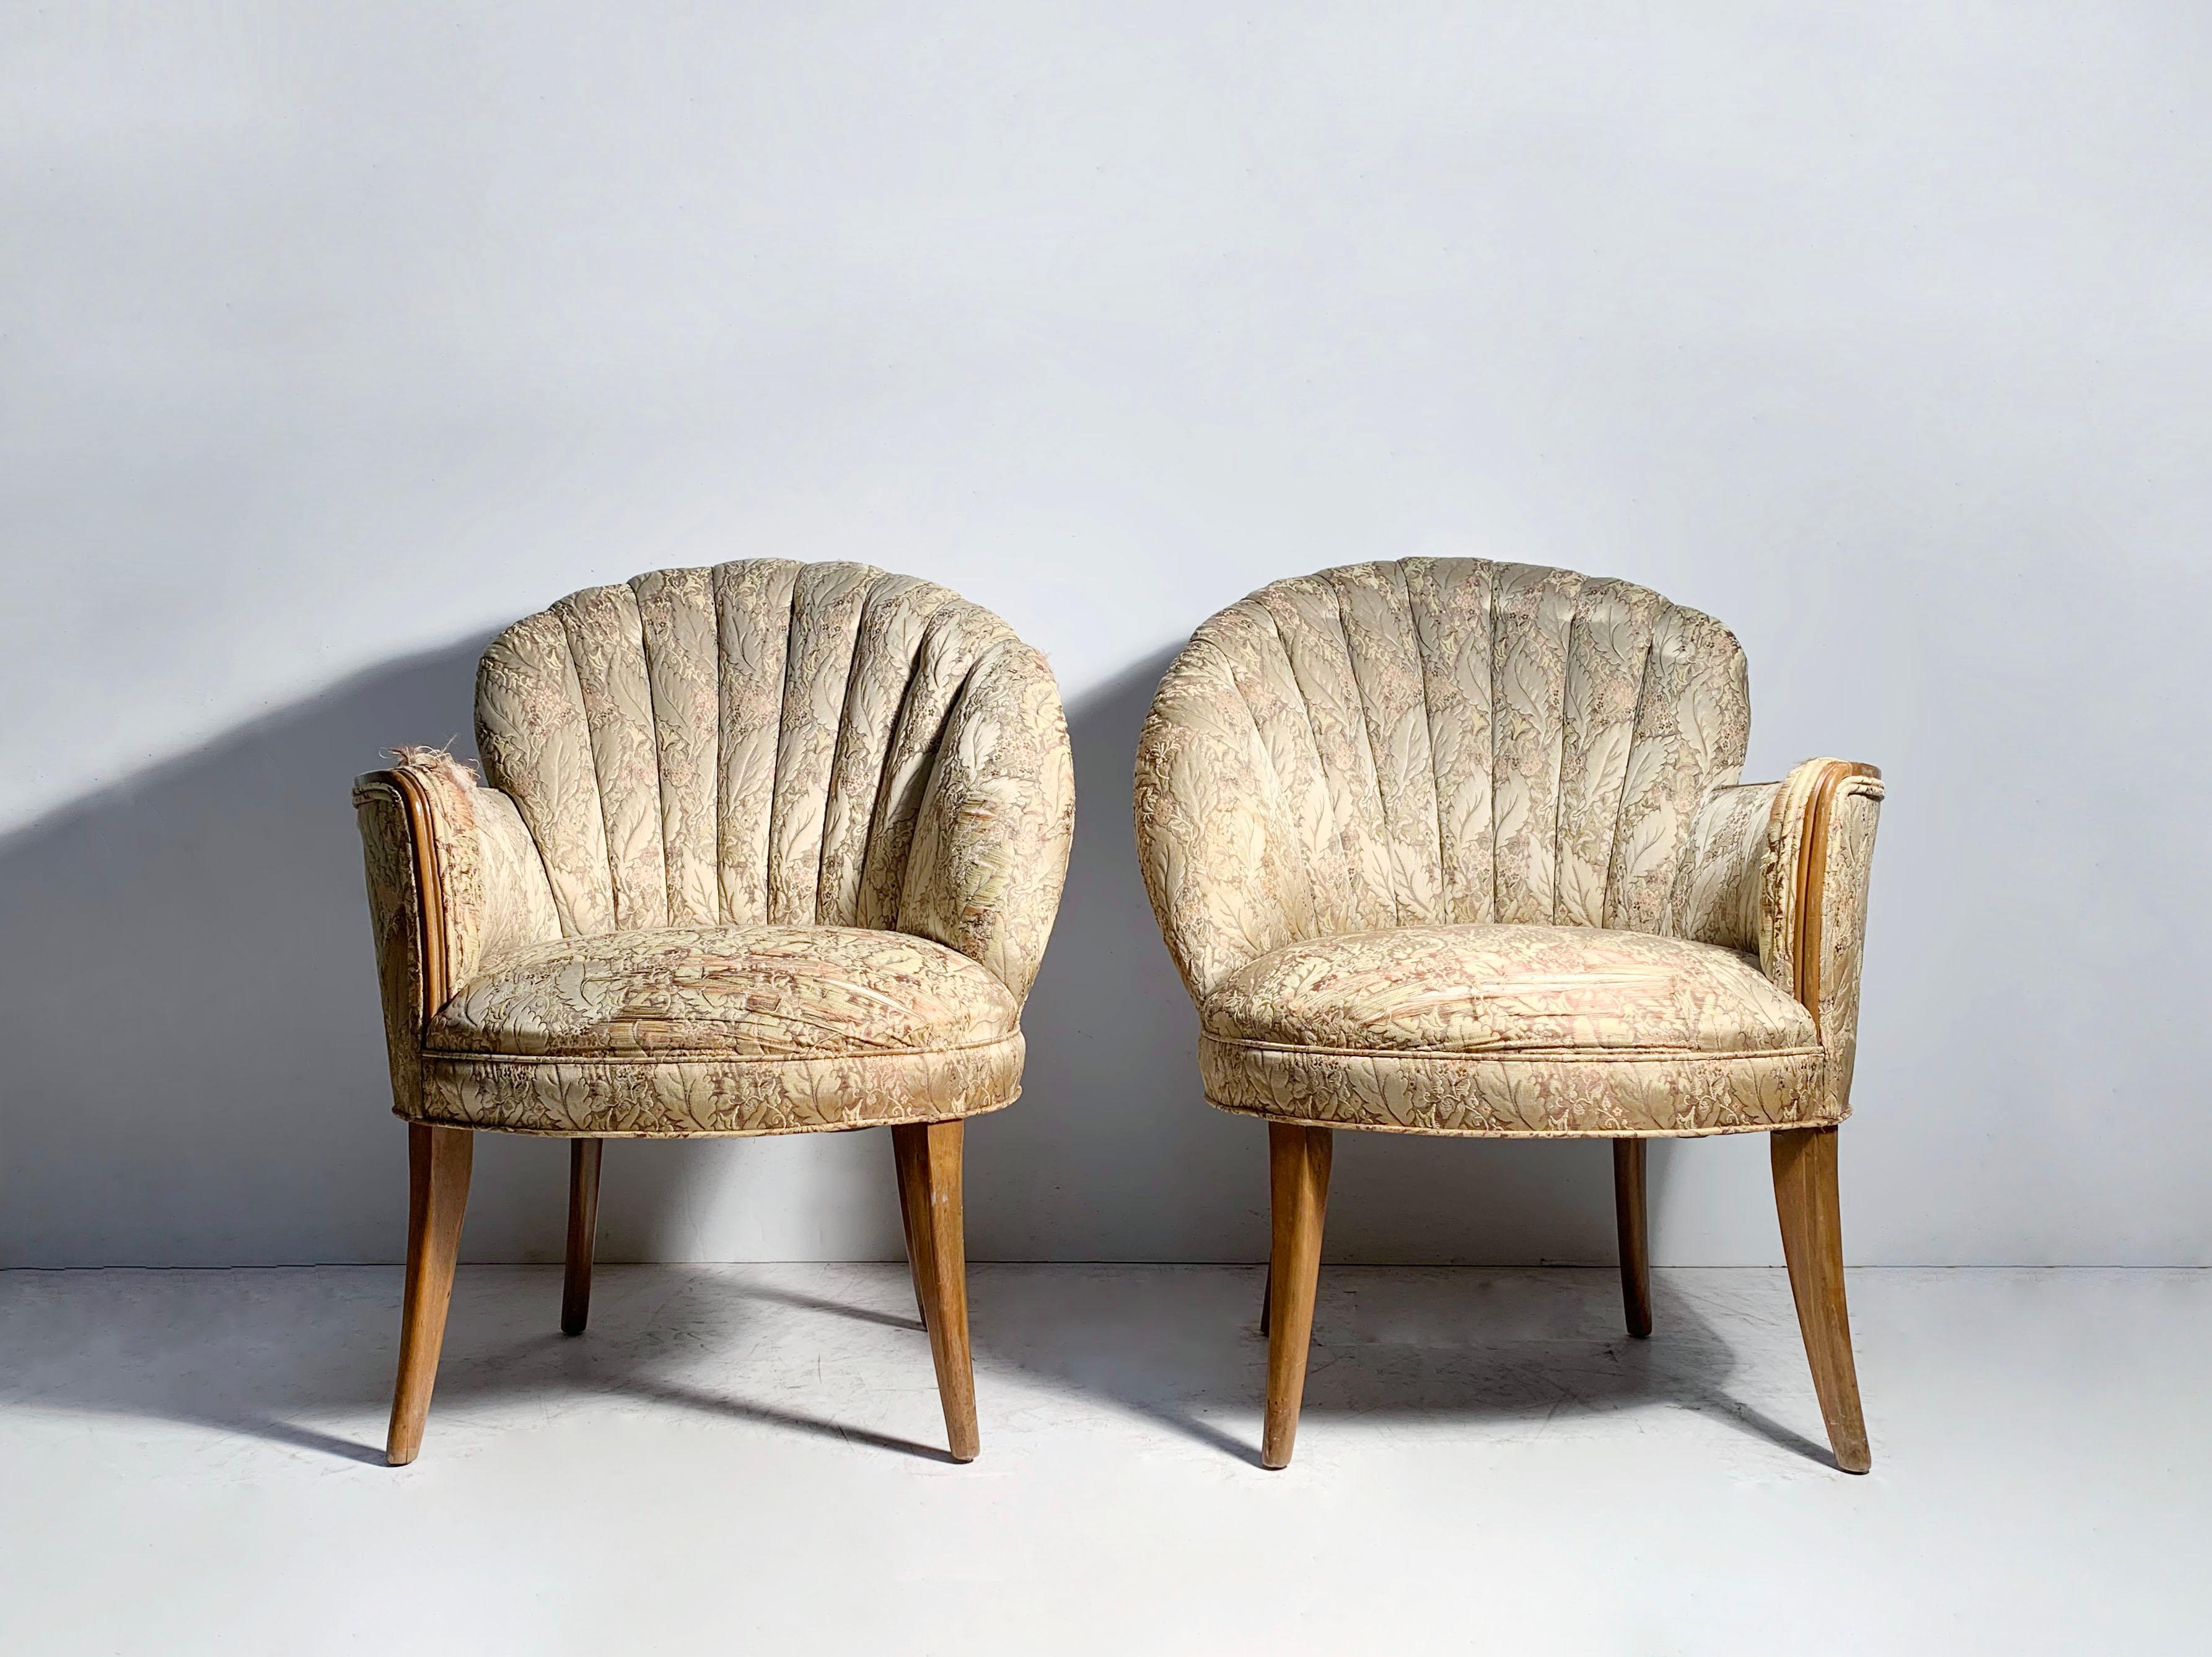 Glamour Pair of Vintage Asymmetrical Fan back chairs.

Style of Dorothy Draper / Gilbert Rohde

Ready for reupholstery.